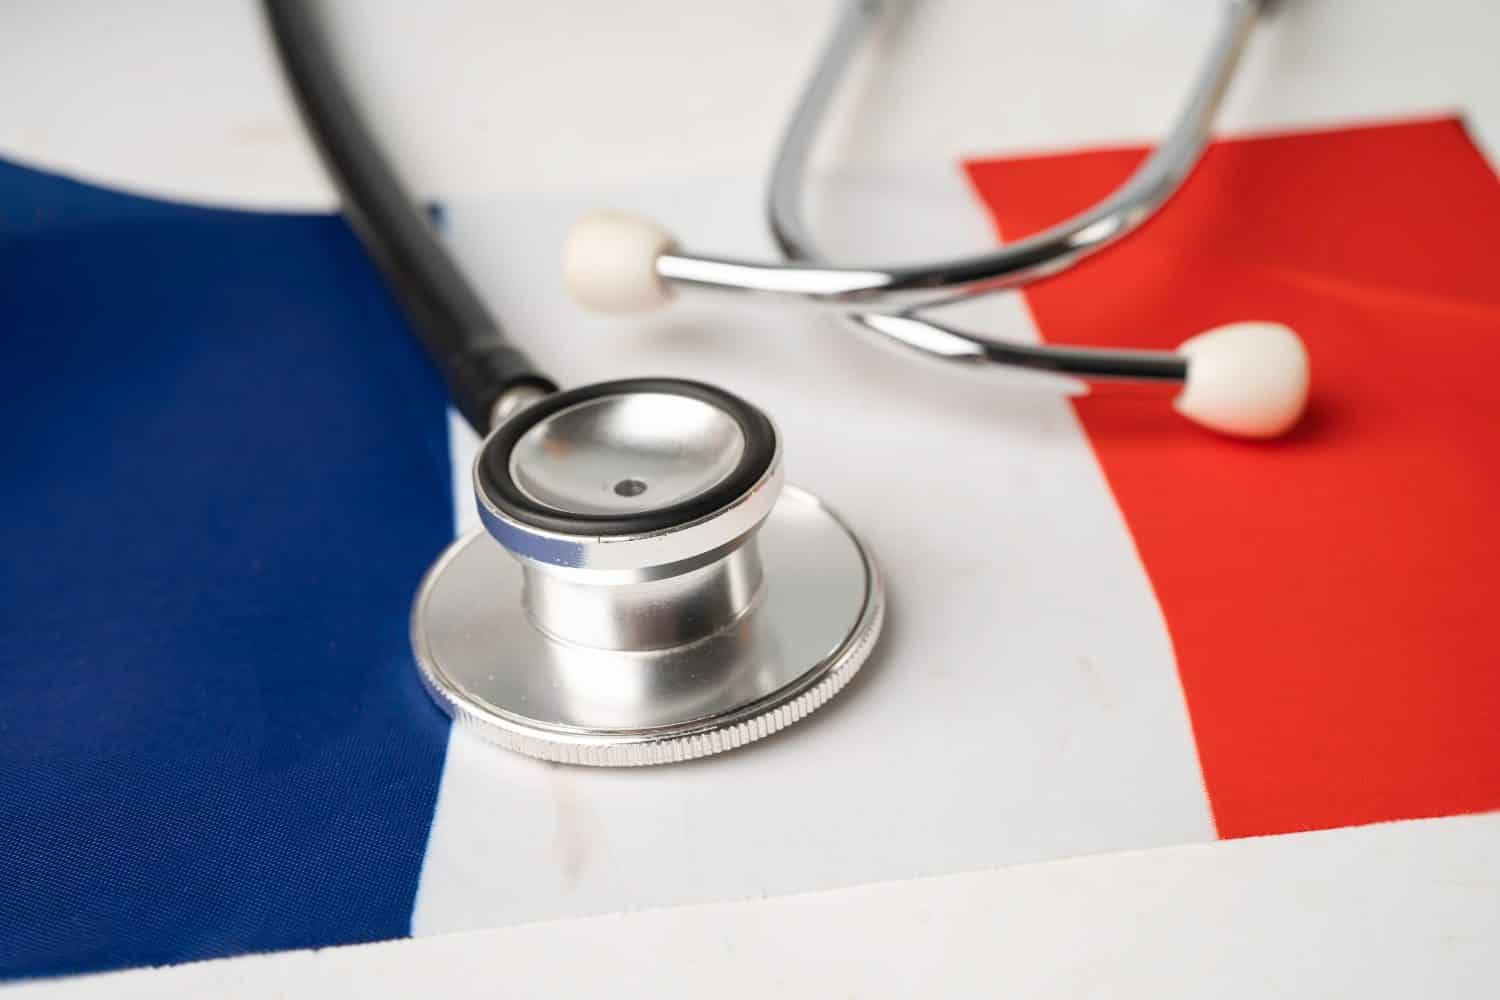 Black stethoscope on France flag background, Business and finance concept.